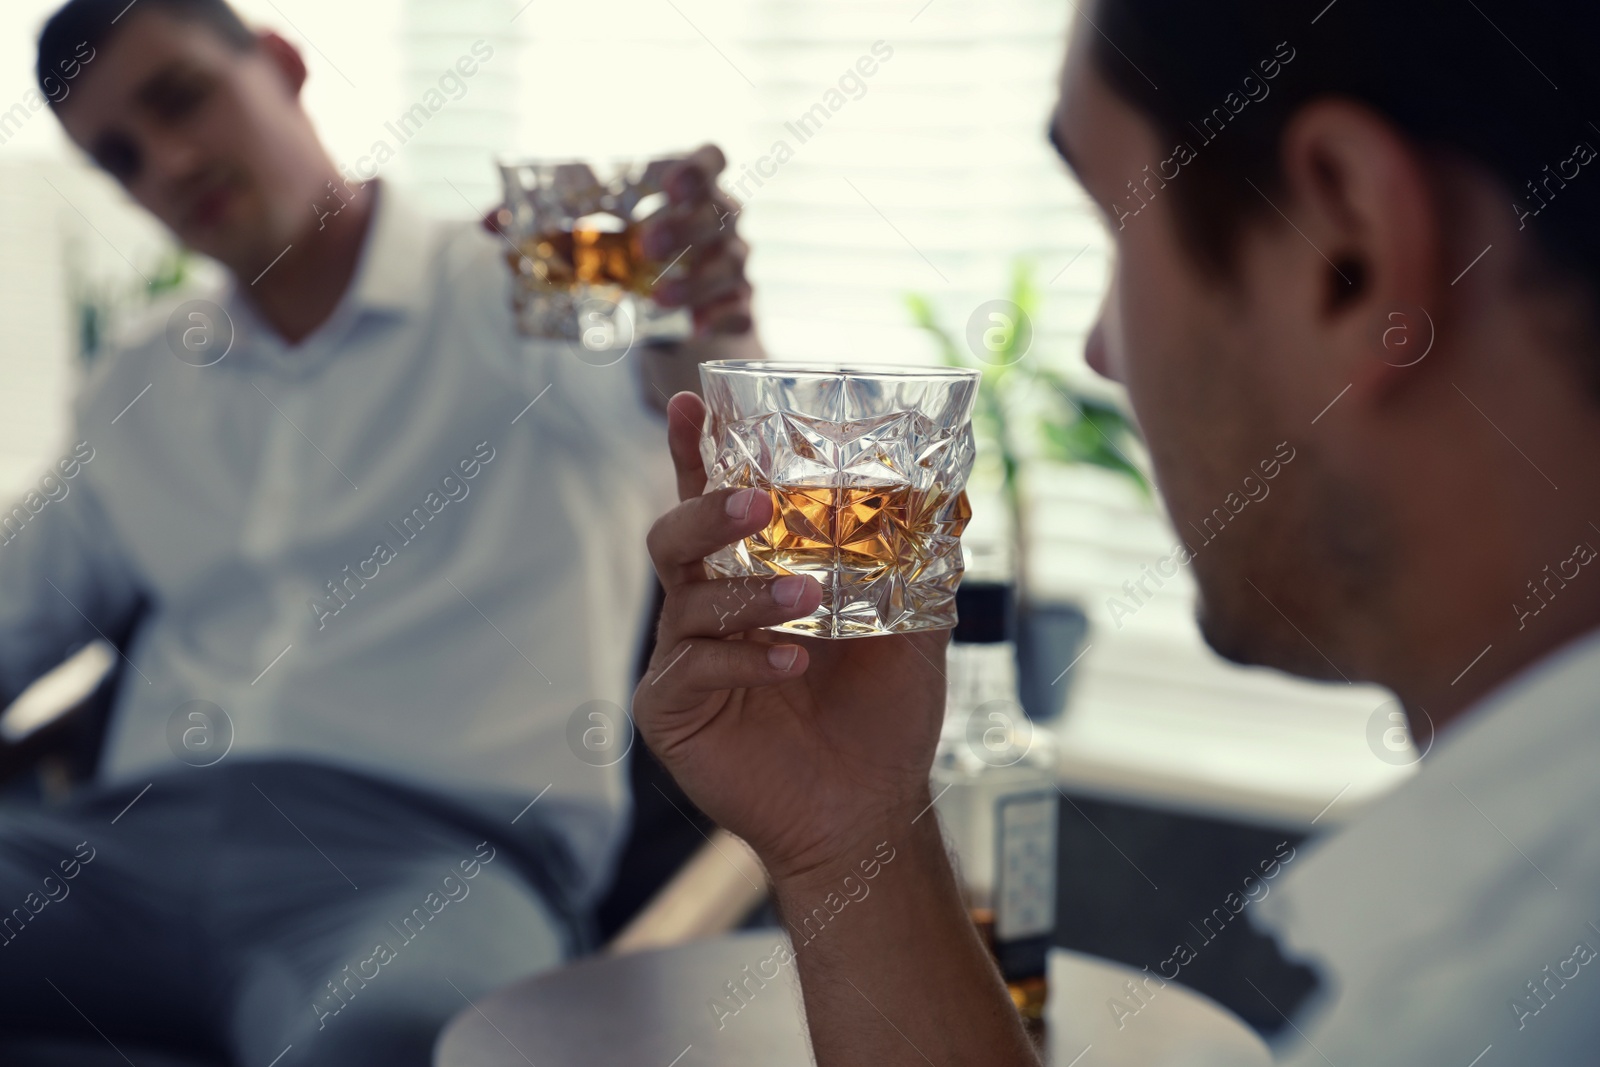 Photo of Young men drinking whiskey together at home